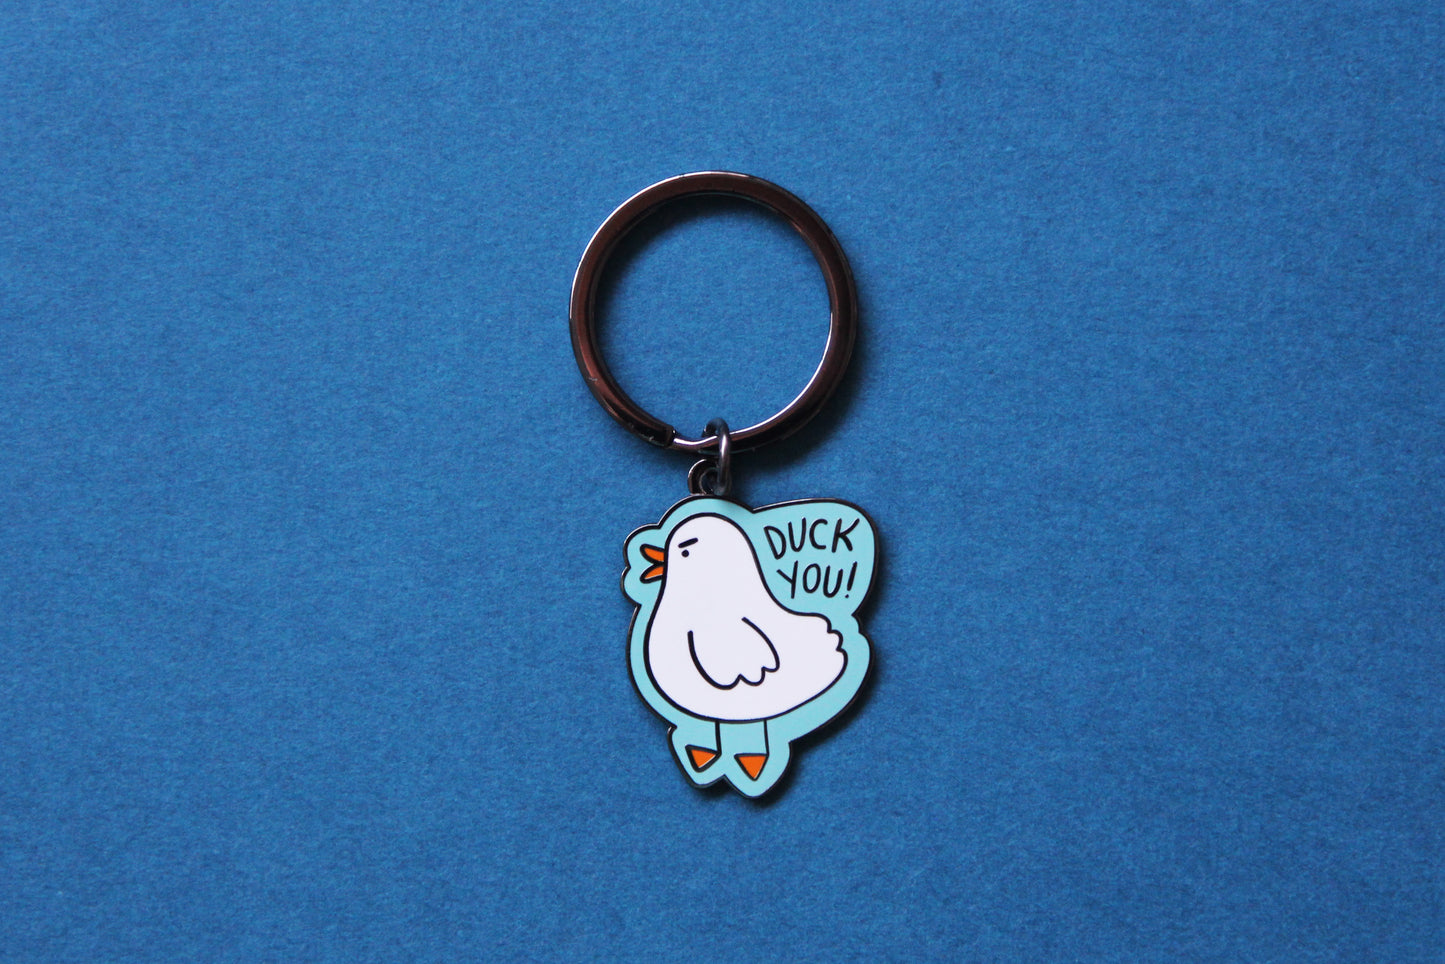 An enamel keychain showing an angry white duck saying "Duck you!" over a teal background.